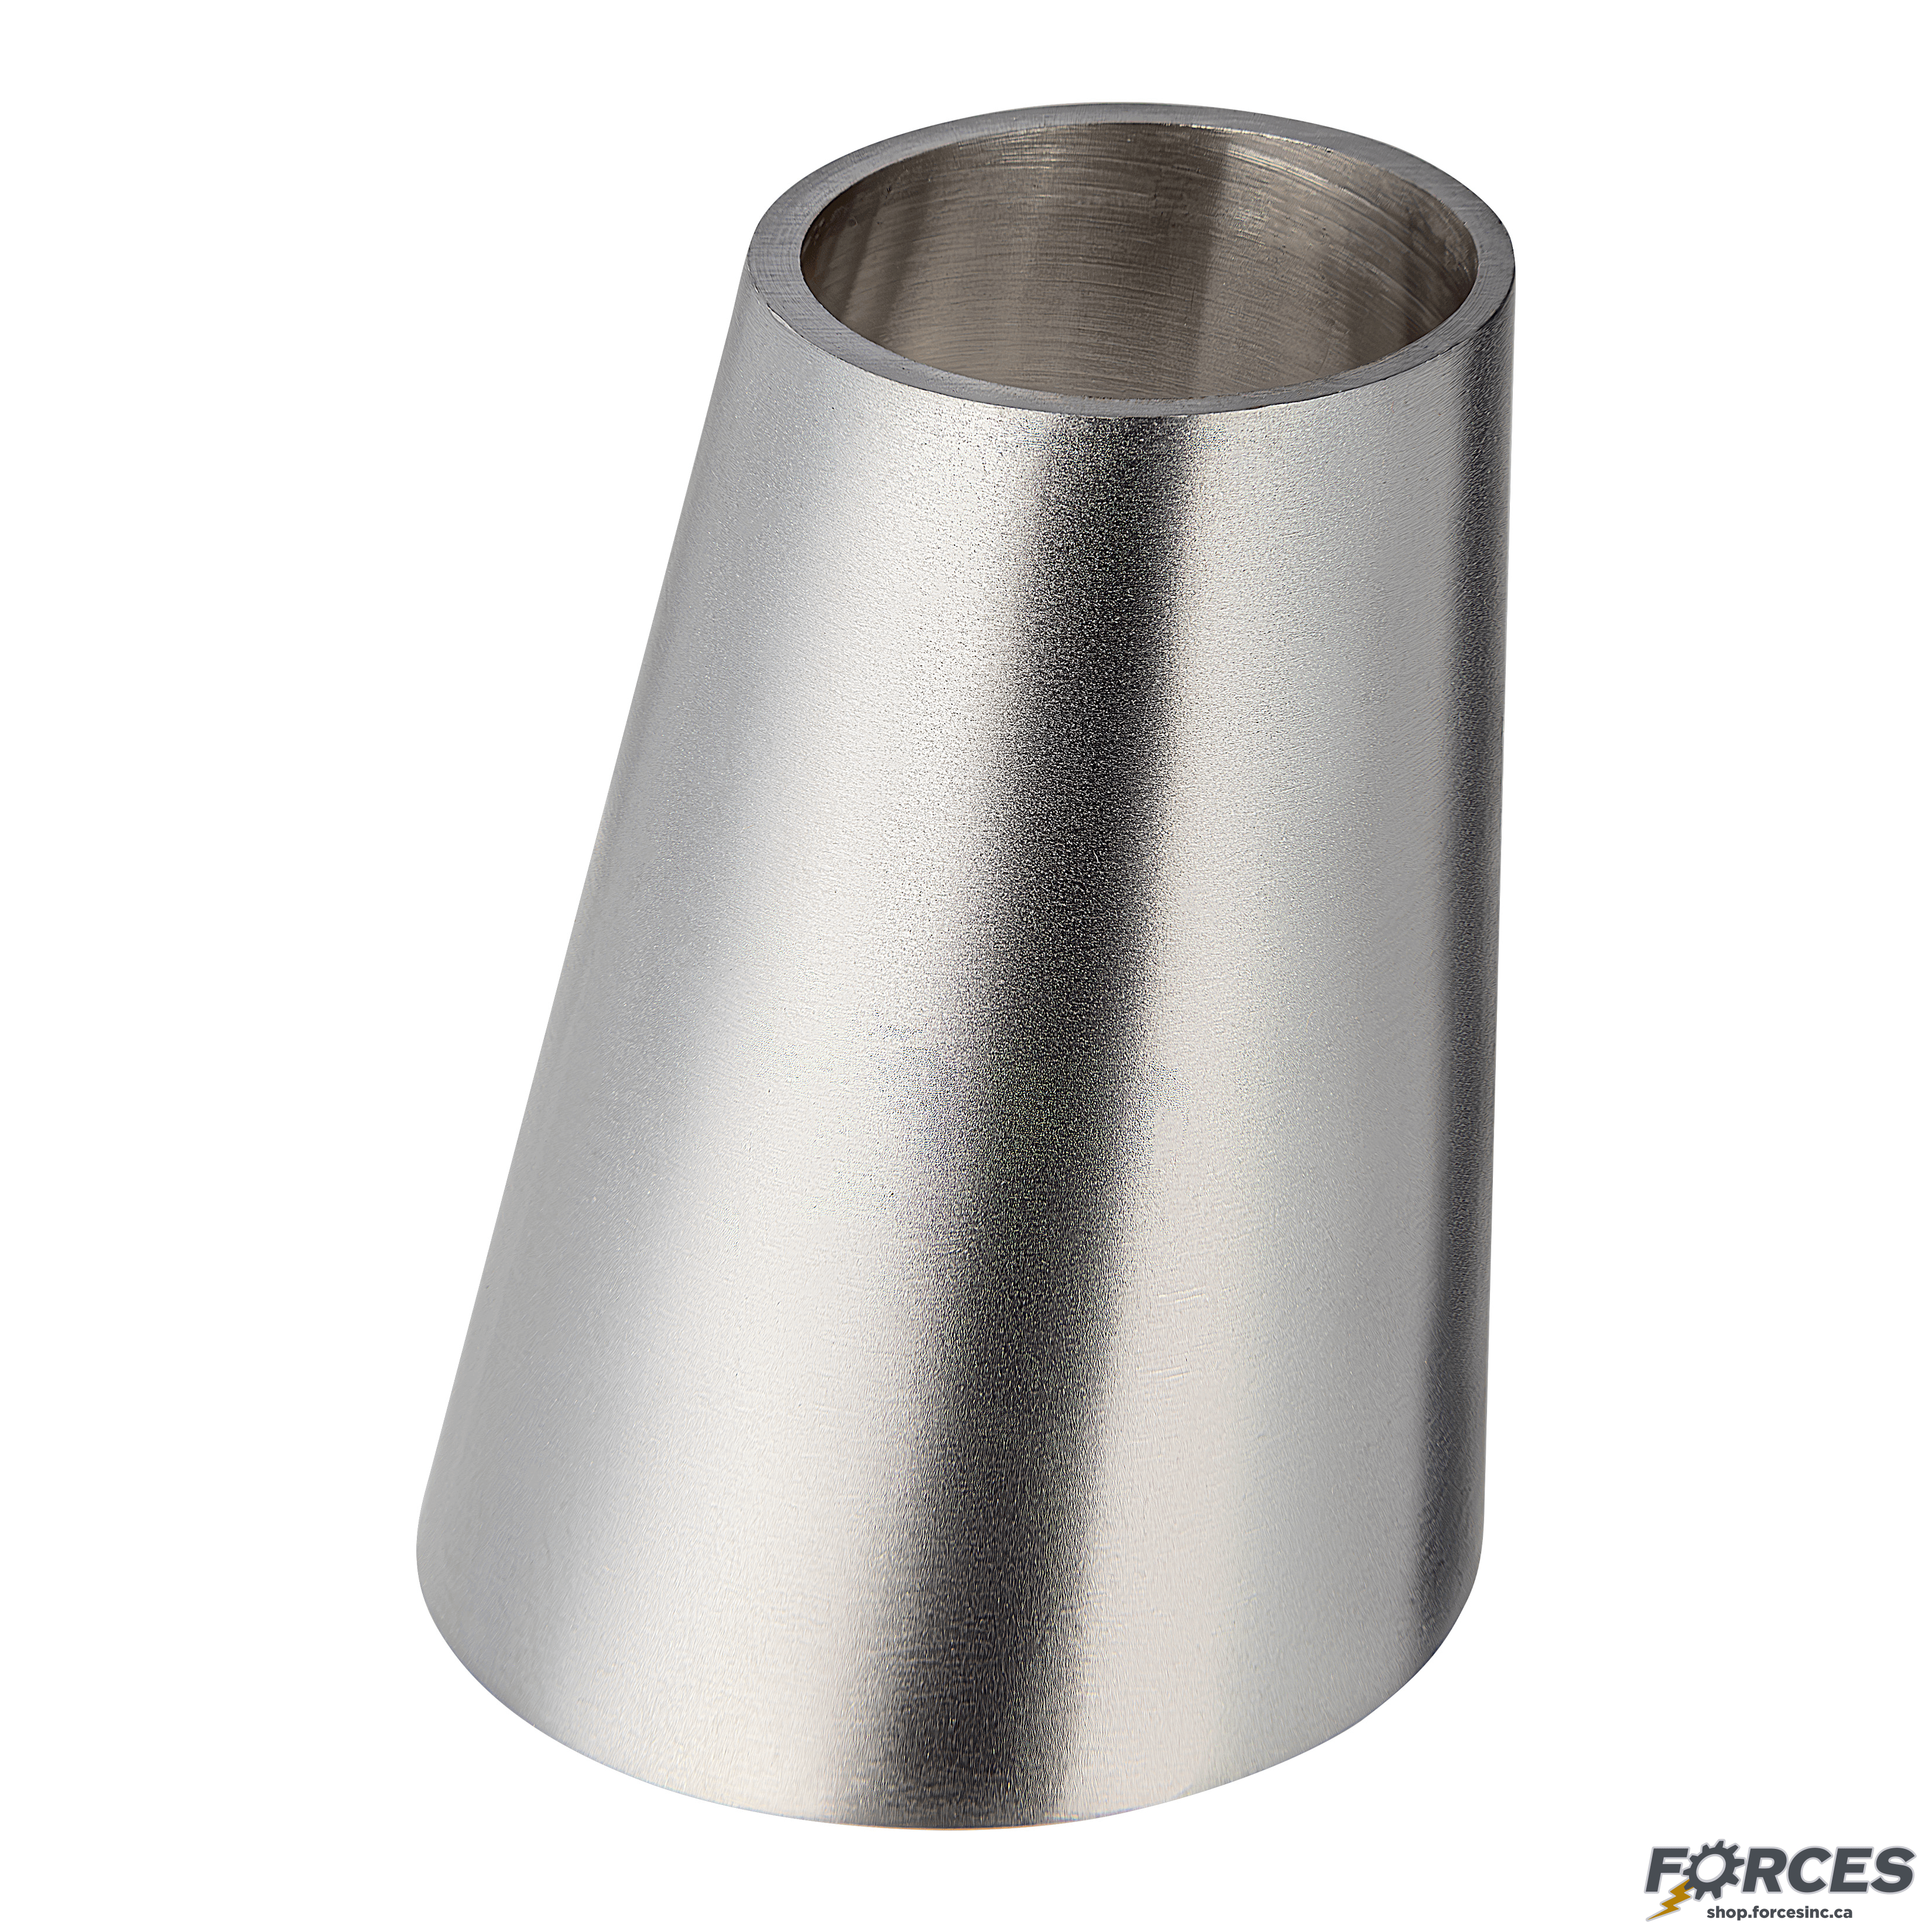 6" x 4" Butt Weld Eccentric Reducer - Stainless Steel 316 - Forces Inc